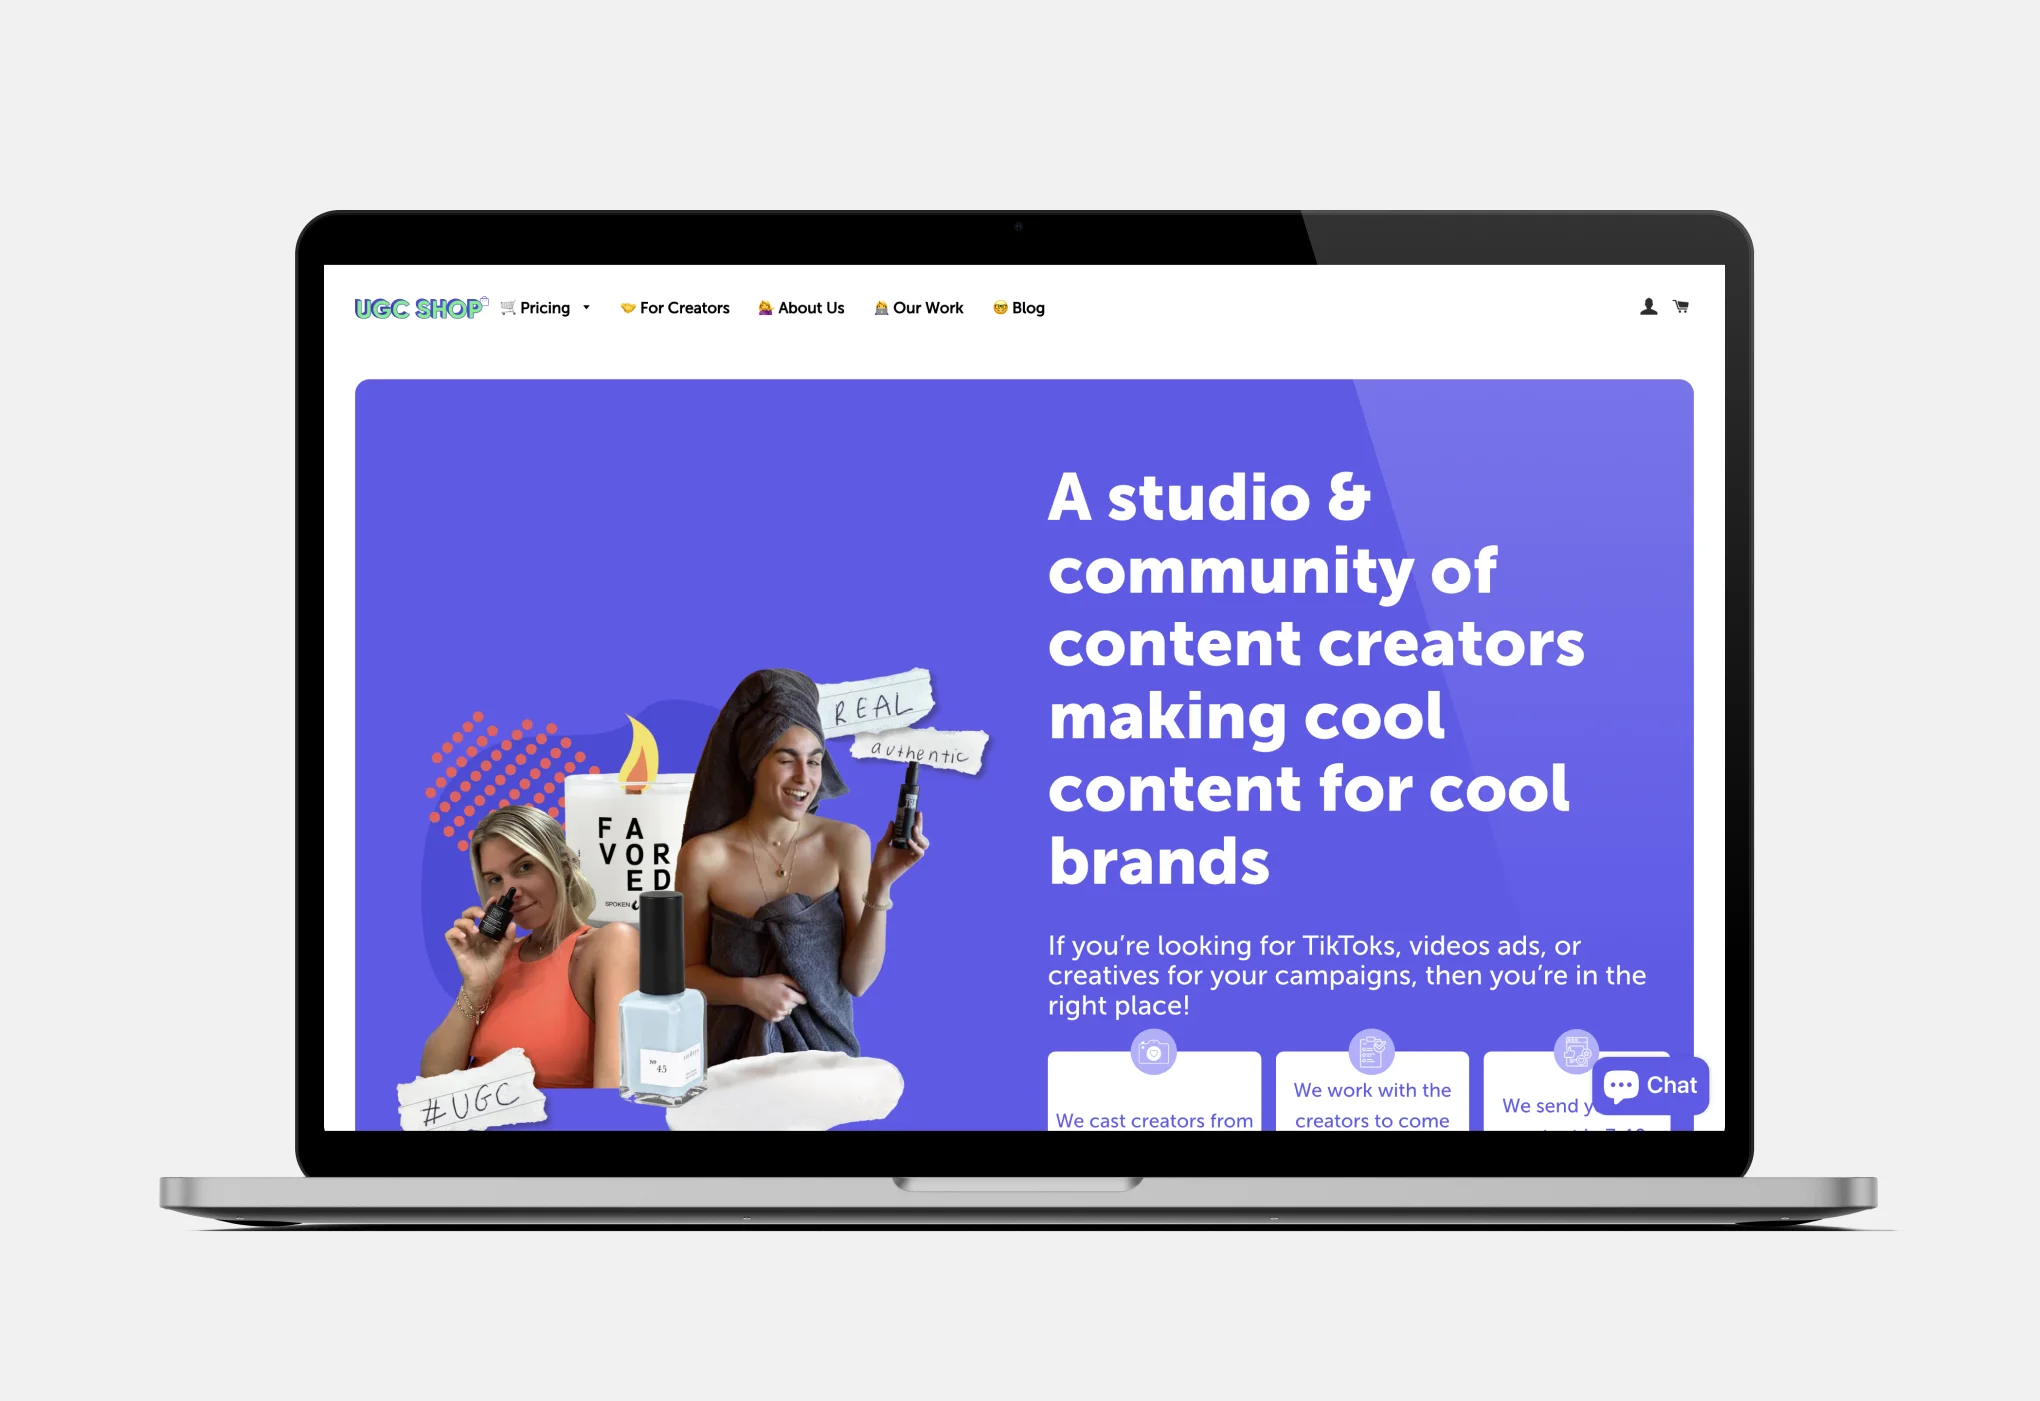 The landing page of UGC shop, with the tagline: A studio & community of content creators making cool content for cool brands.